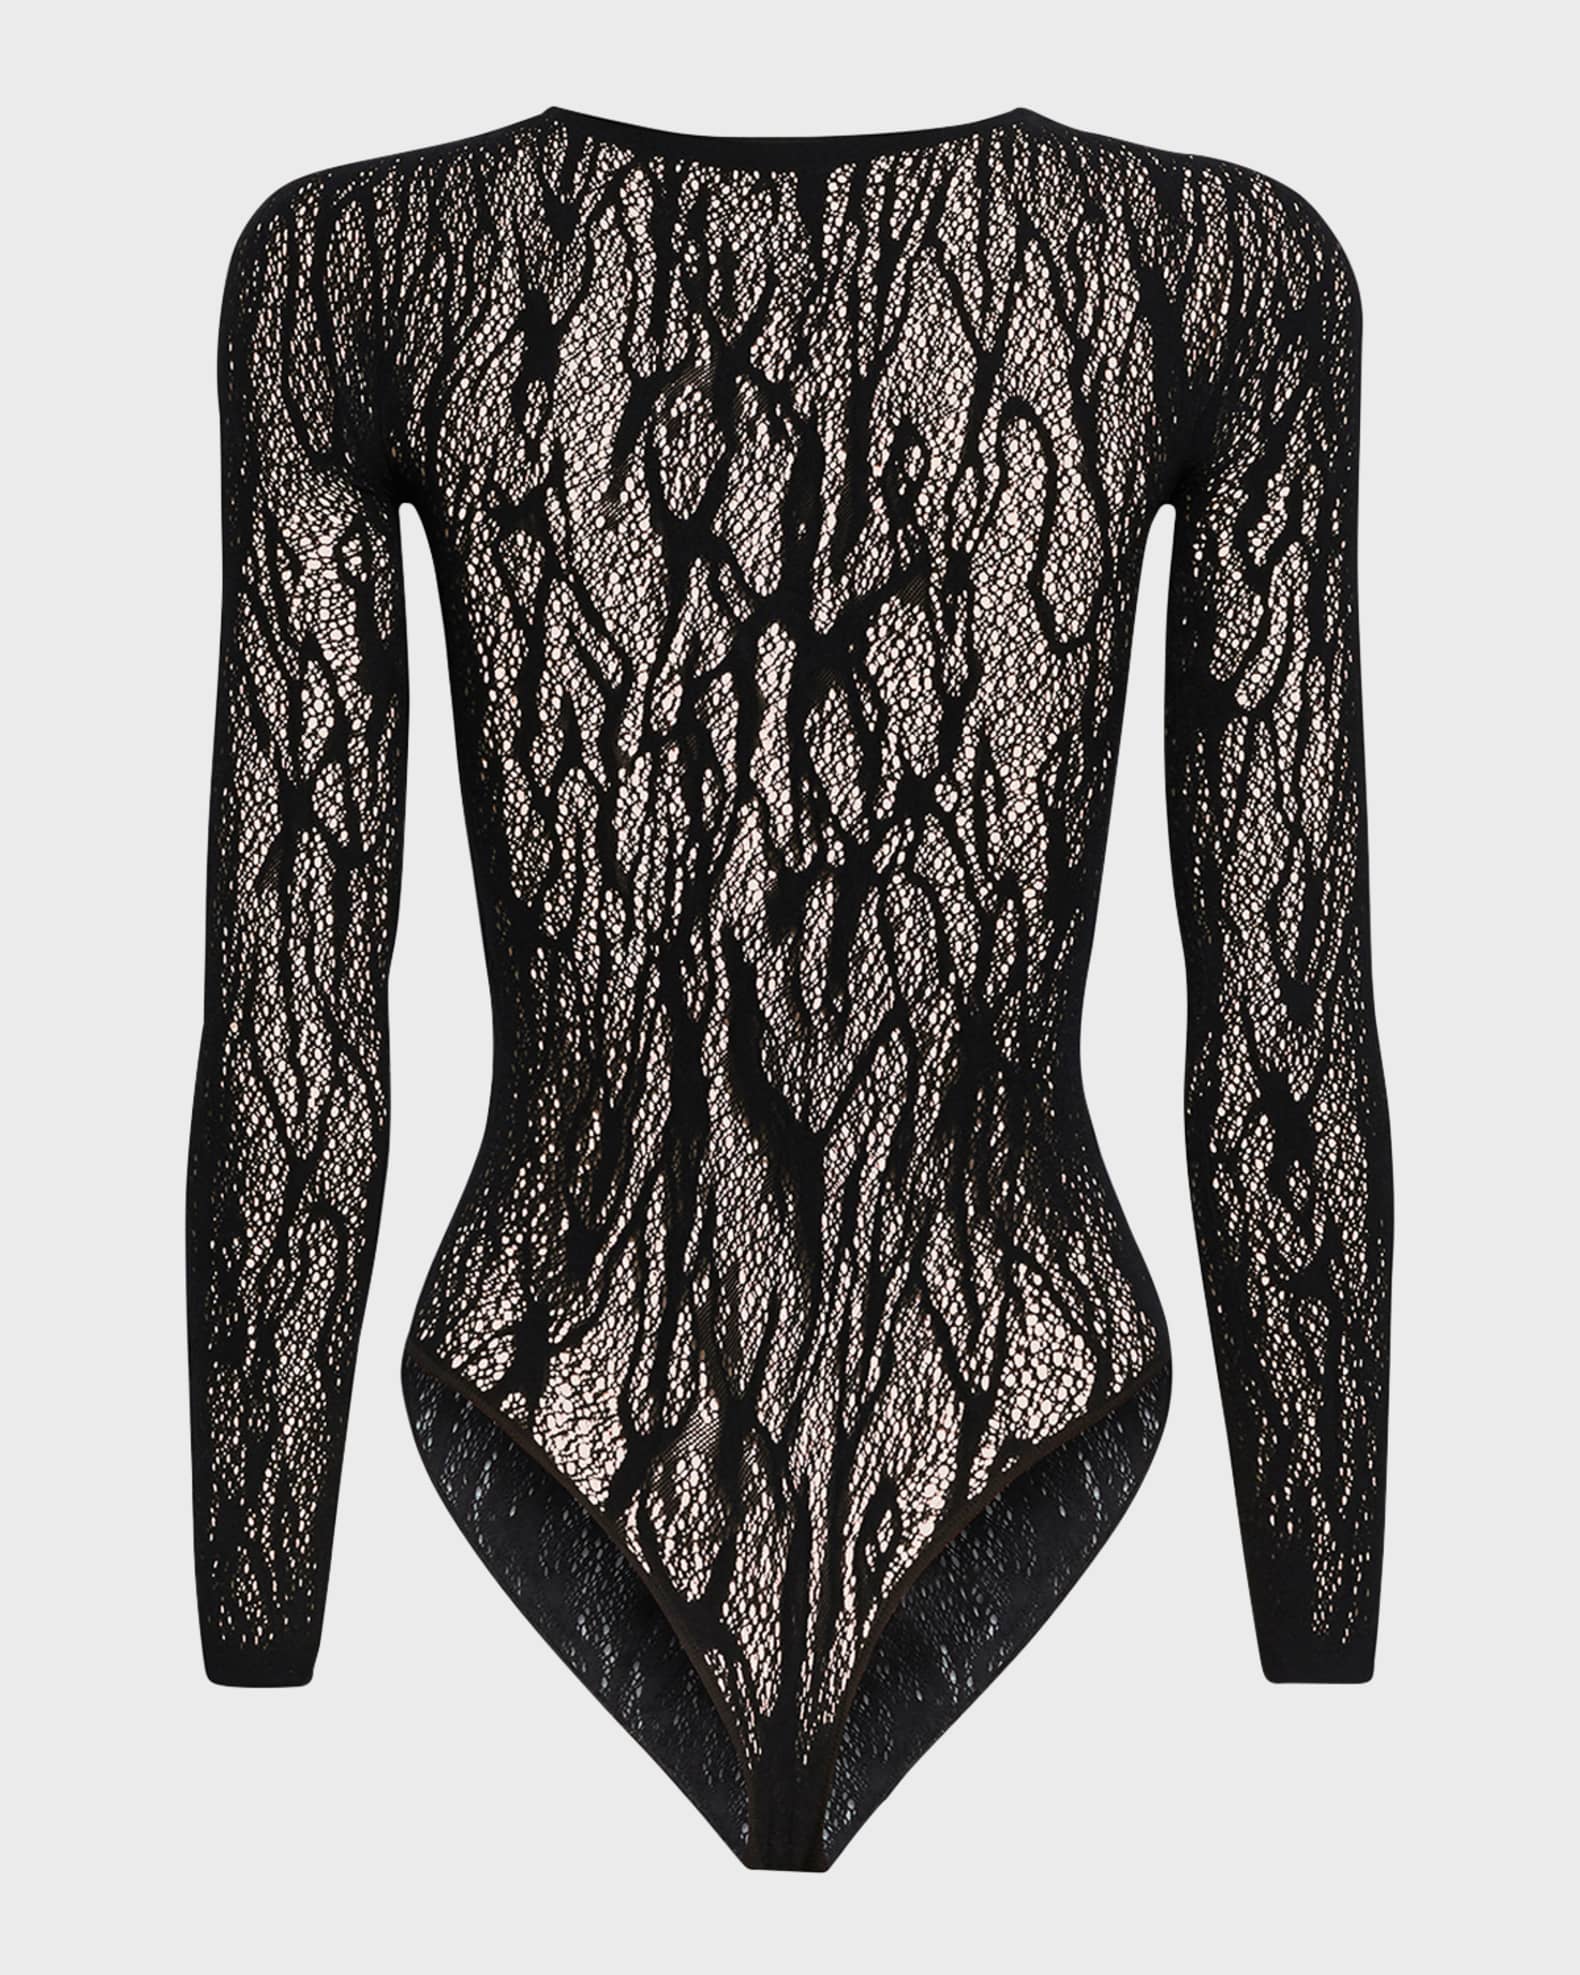 Wolford Long-Sleeve Snakeskin Lace Thong Bodysuit